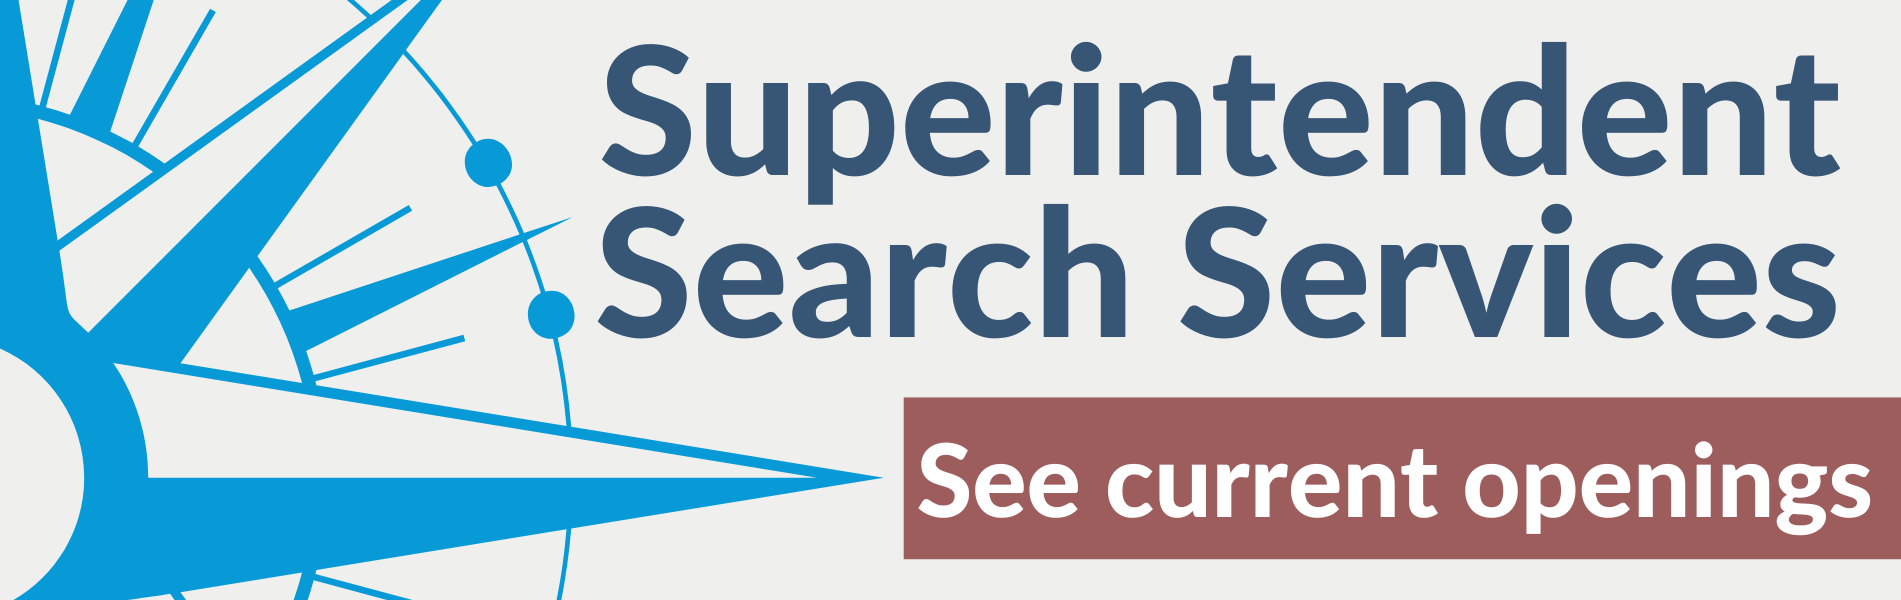 Superintendent search services - See current openings